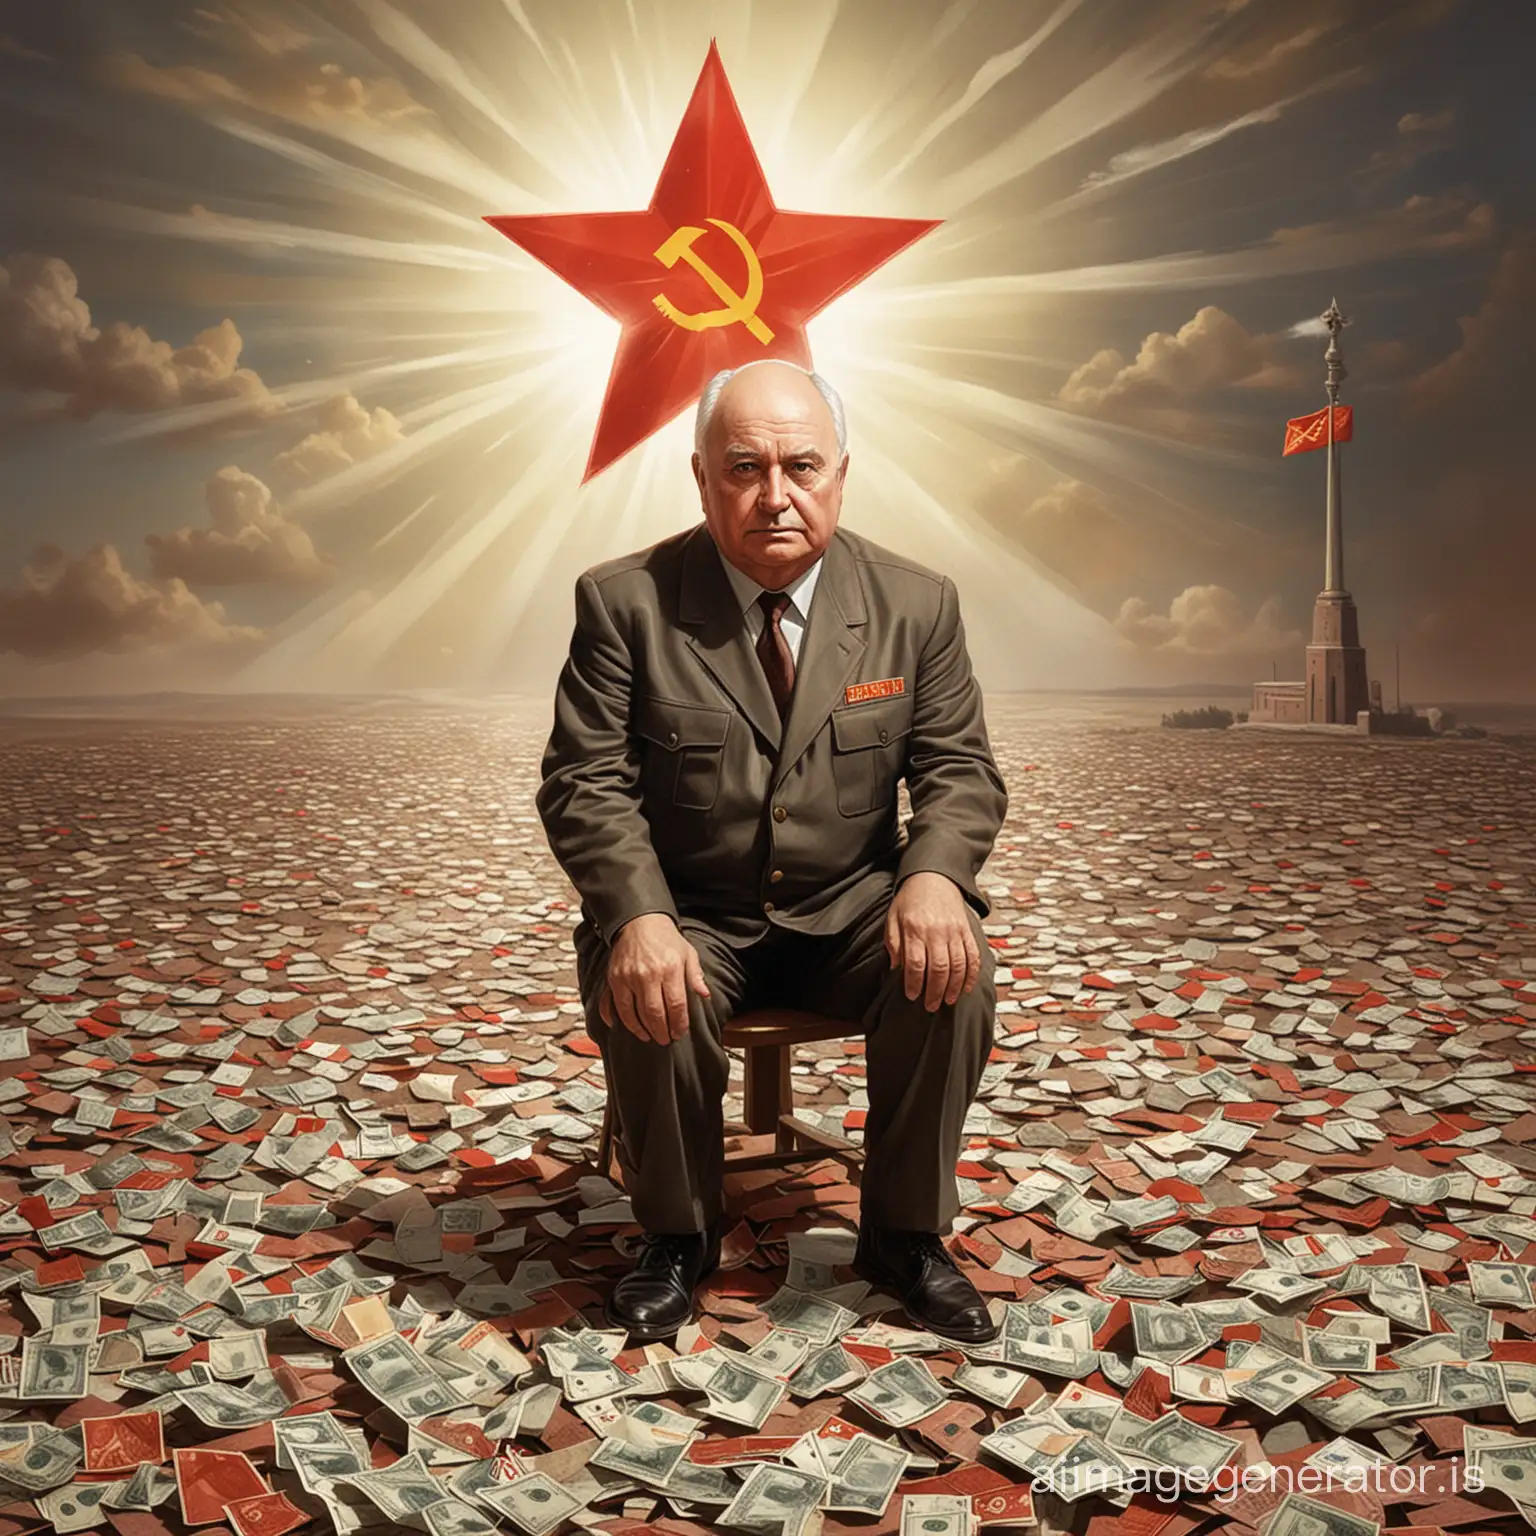 Take a photo, in the style of a caricature: "It is desirable to create a caricature where the USSR is represented as a huge bust of a Soviet leader, possibly with an image of Mikhail Gorbachev, shining with power and authority. Above him is a shining ray symbolizing the 'bright future' and the superiority of the ideology. The USA, in turn, are depicted as a small cowboy sitting on the ground and looking up at the USSR with astonishment and envy. Around the cowboy, scattered dollars and destroyed US flags are visible, emphasizing their 'decline' in front of the power of the Soviet Union. The overall impression should emphasize the idea of the superiority and power of the USSR over the USA in this caricature."